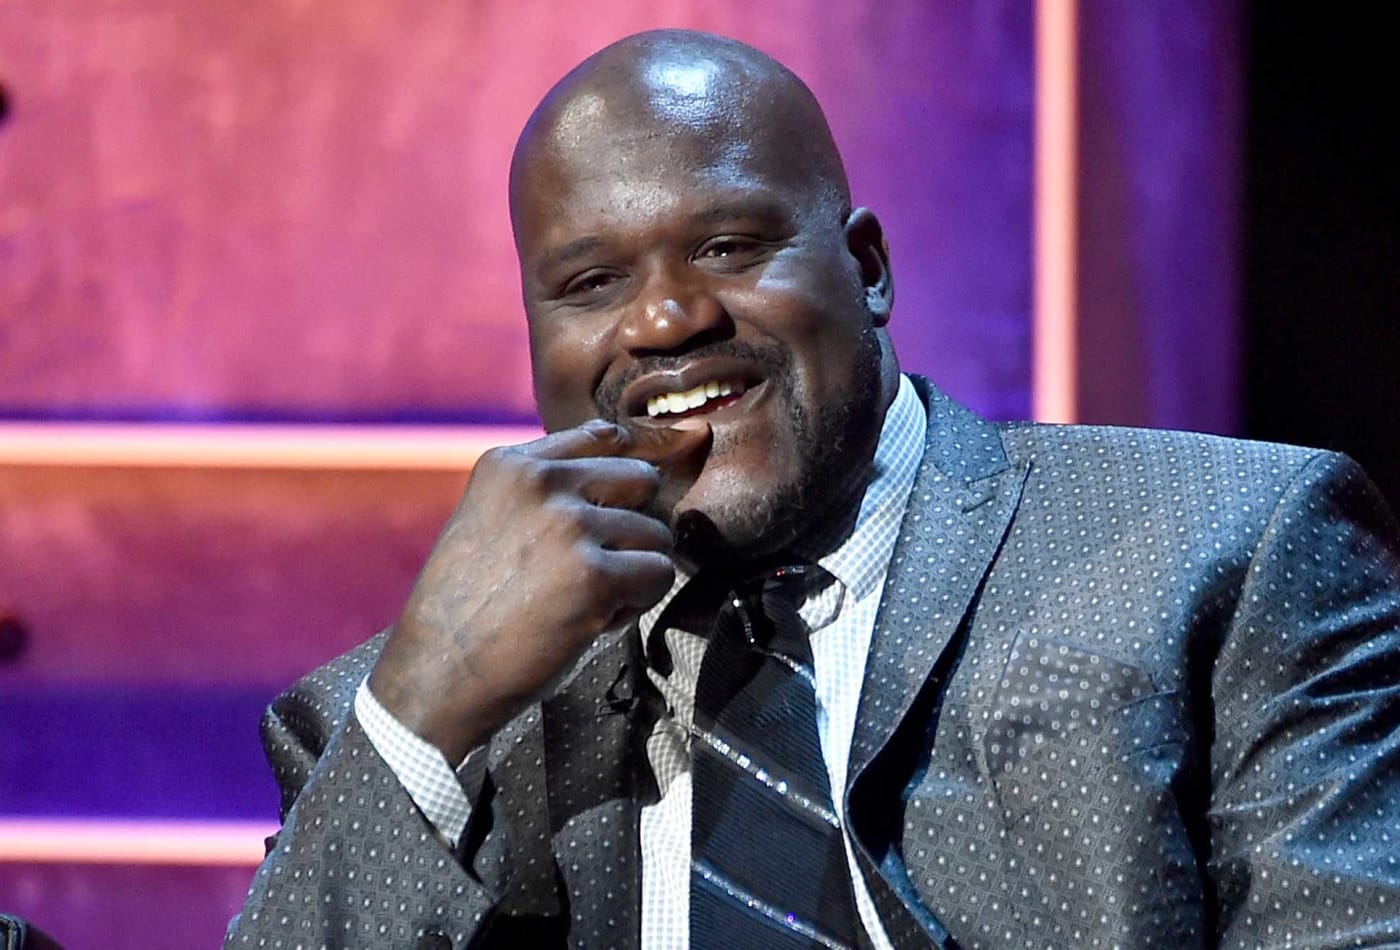 How tall is Shaquille O'Neal?